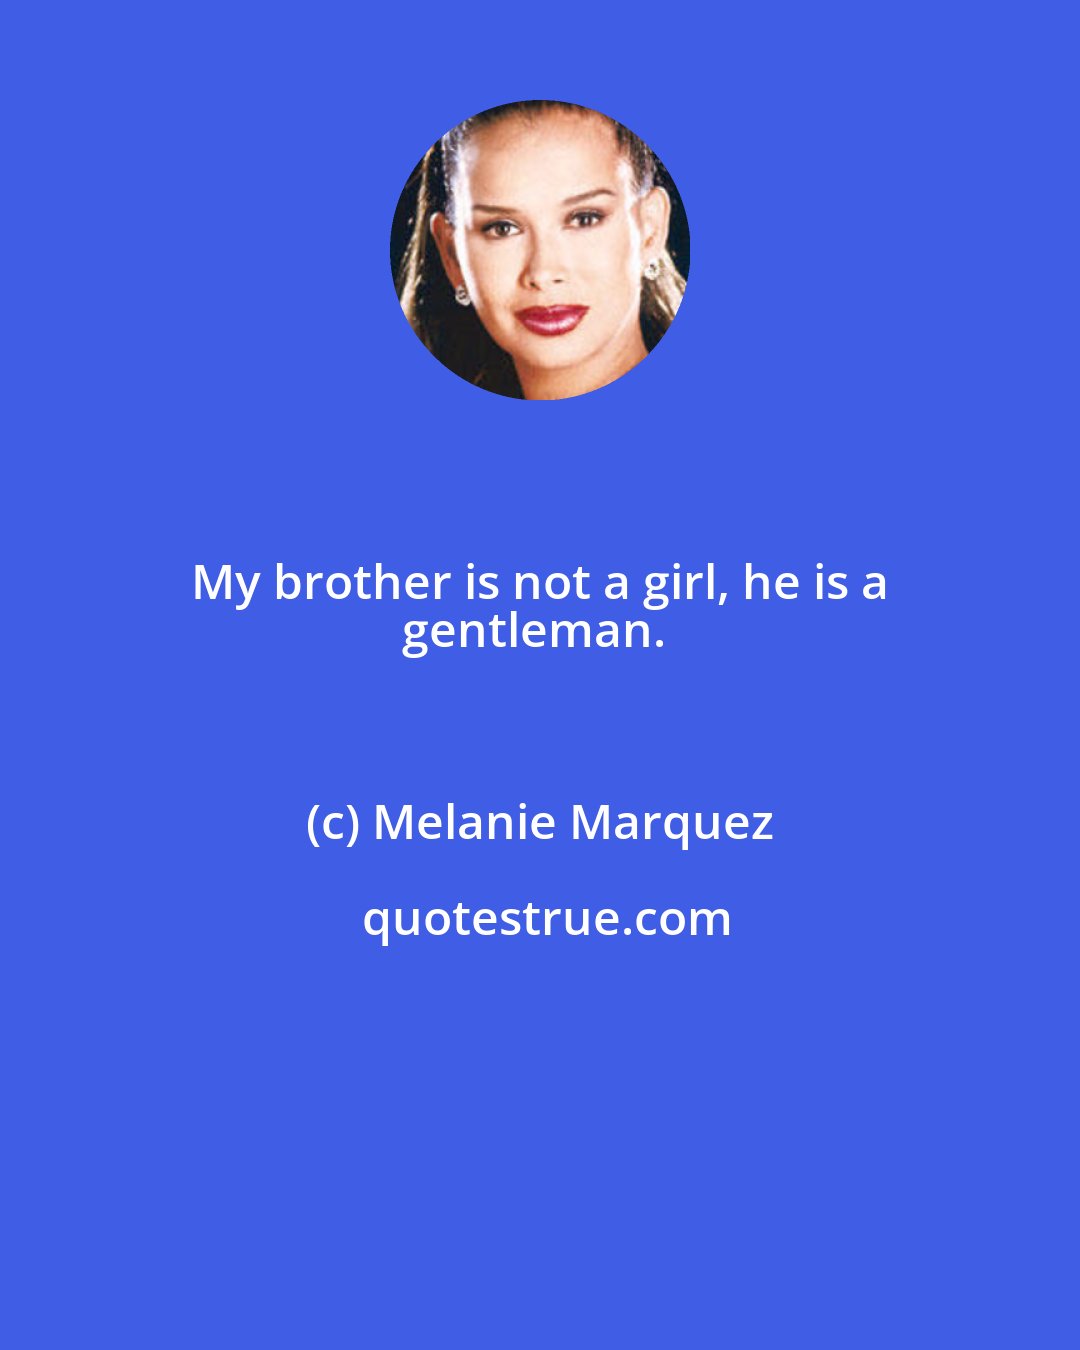 Melanie Marquez: My brother is not a girl, he is a 
gentleman.